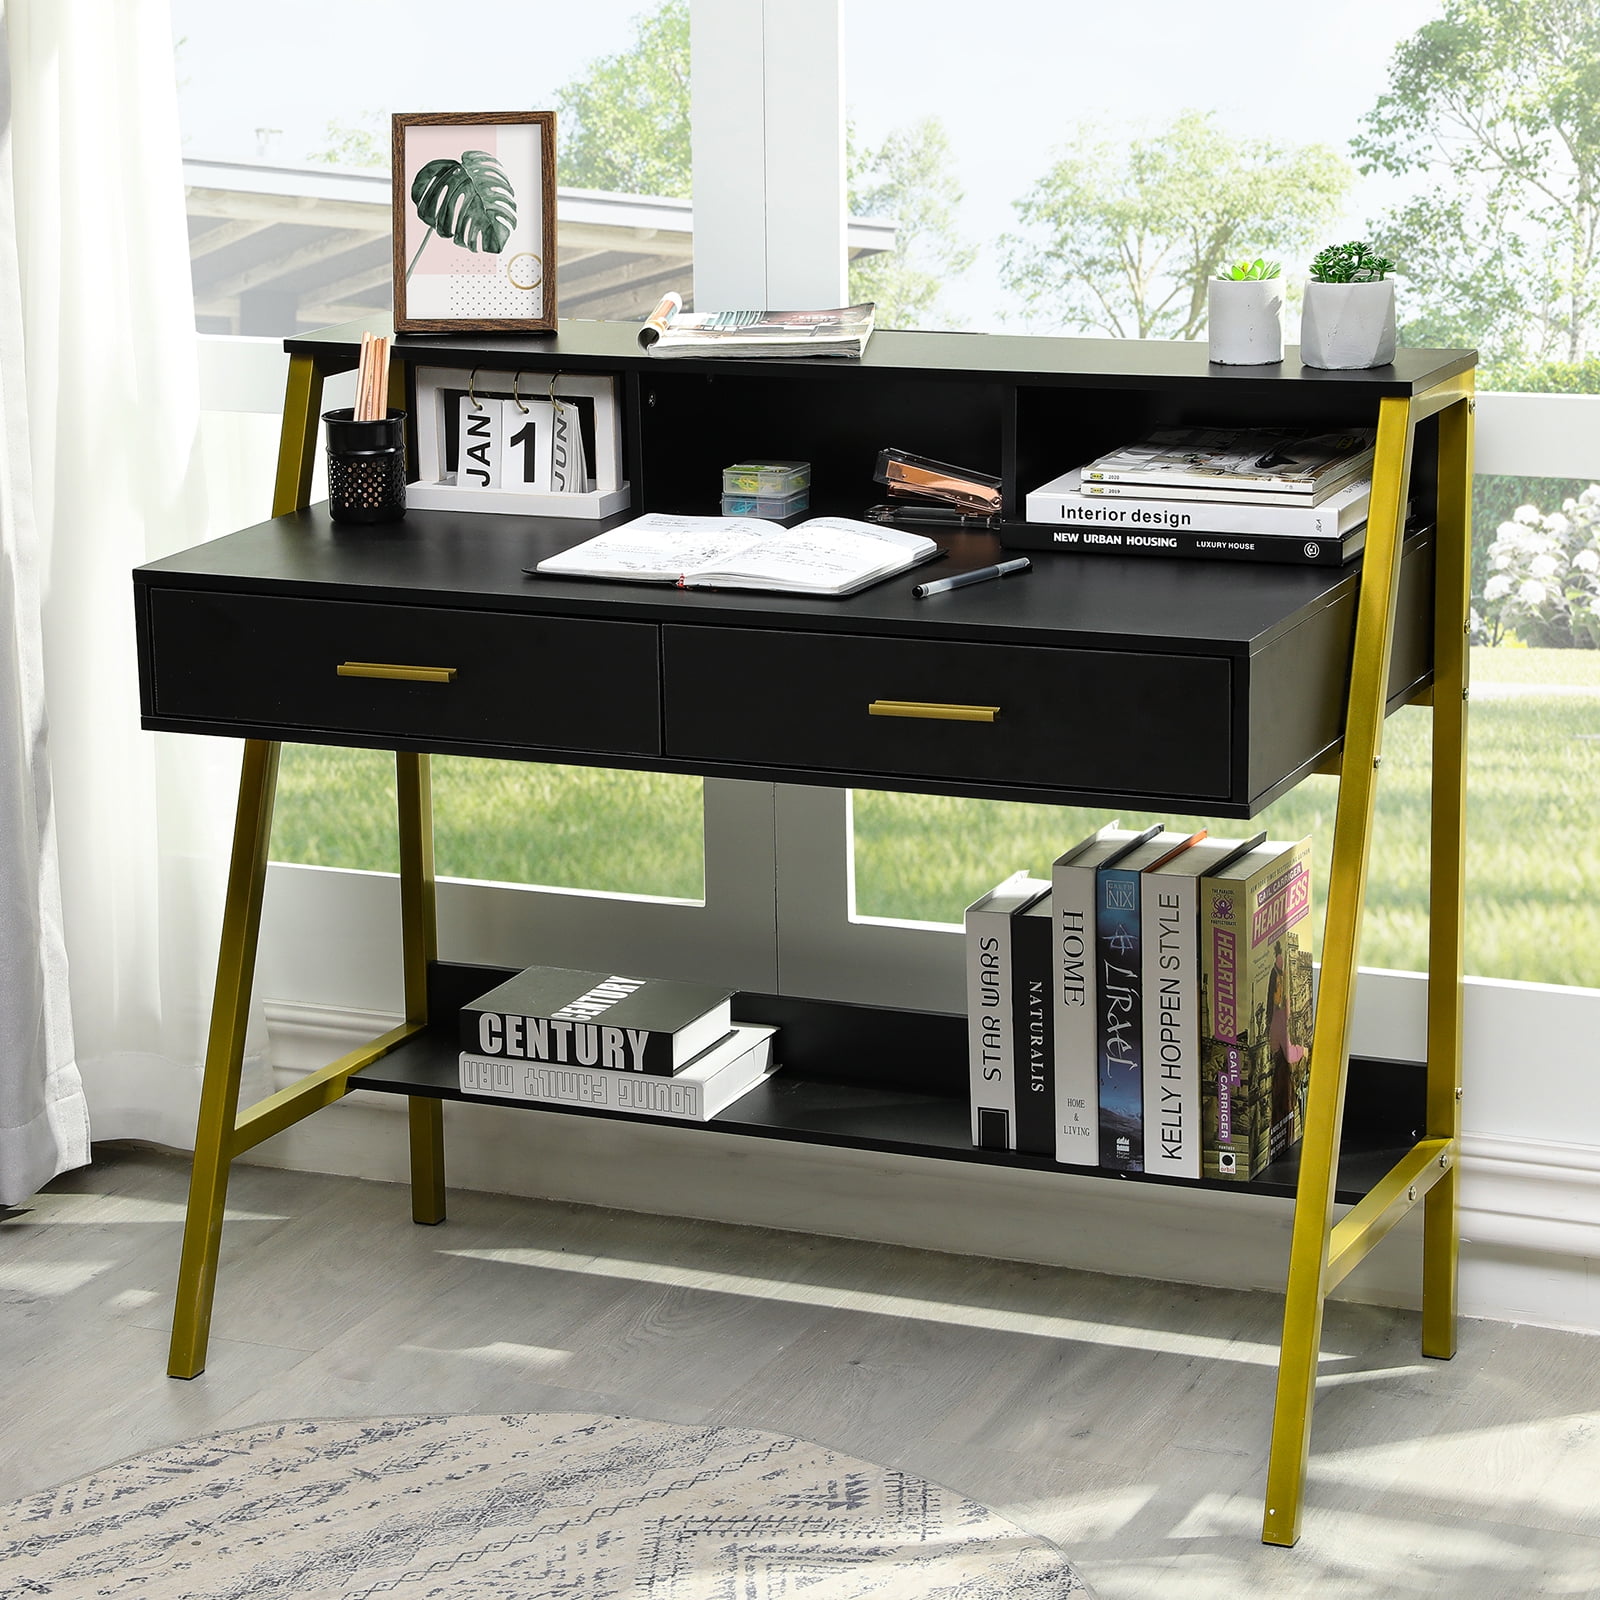 Luxury Computer Desk with Bookshelves Home Office Study Desk Laptop Write Table 